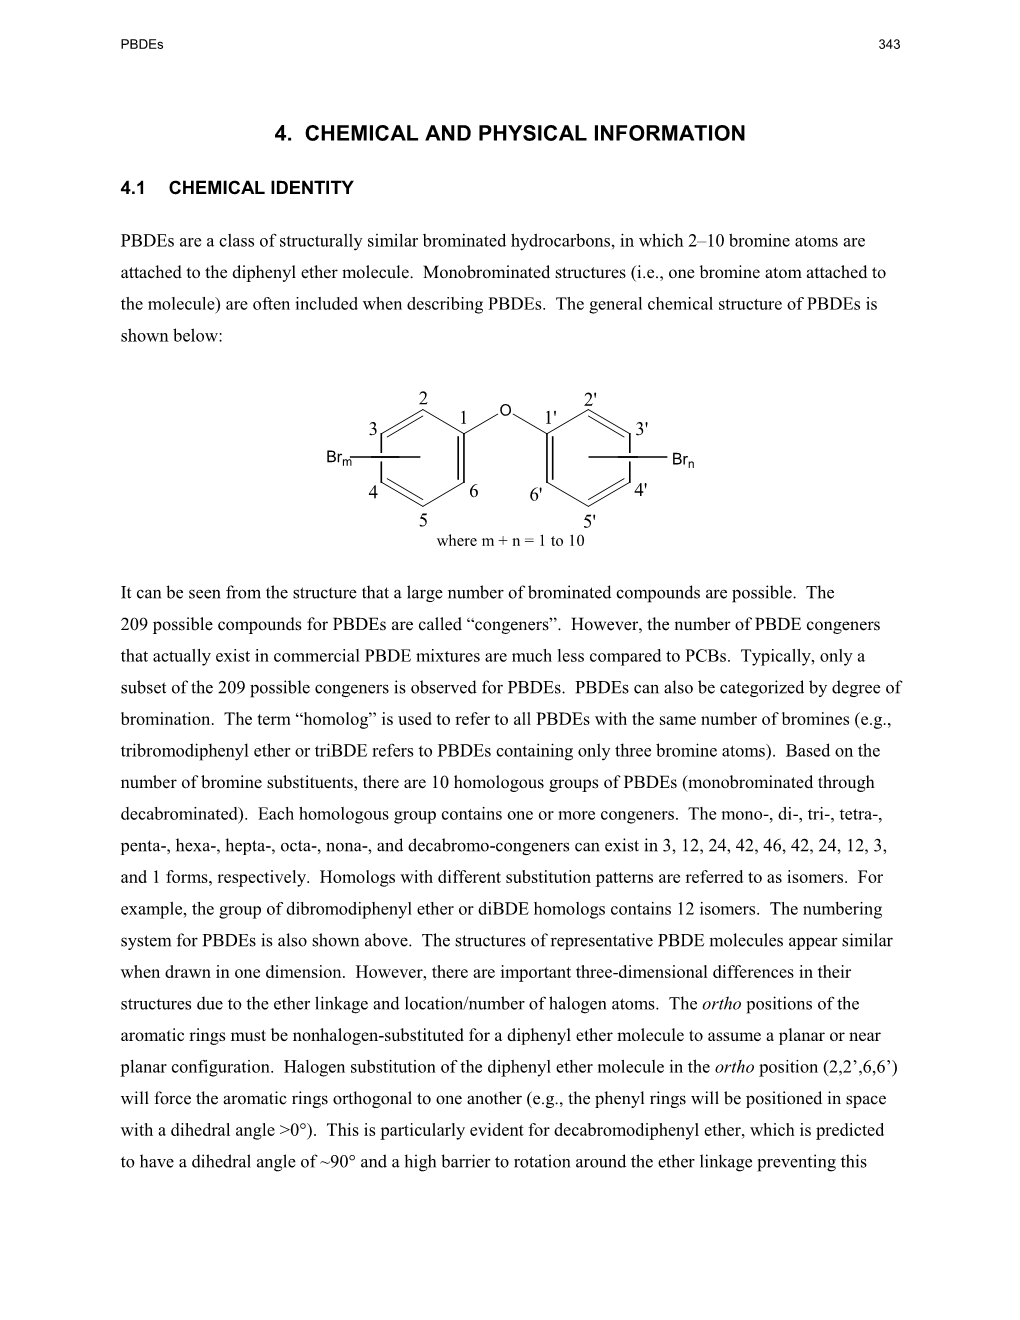 Toxicological Profile for Polybrominated Diphenyl Ethers